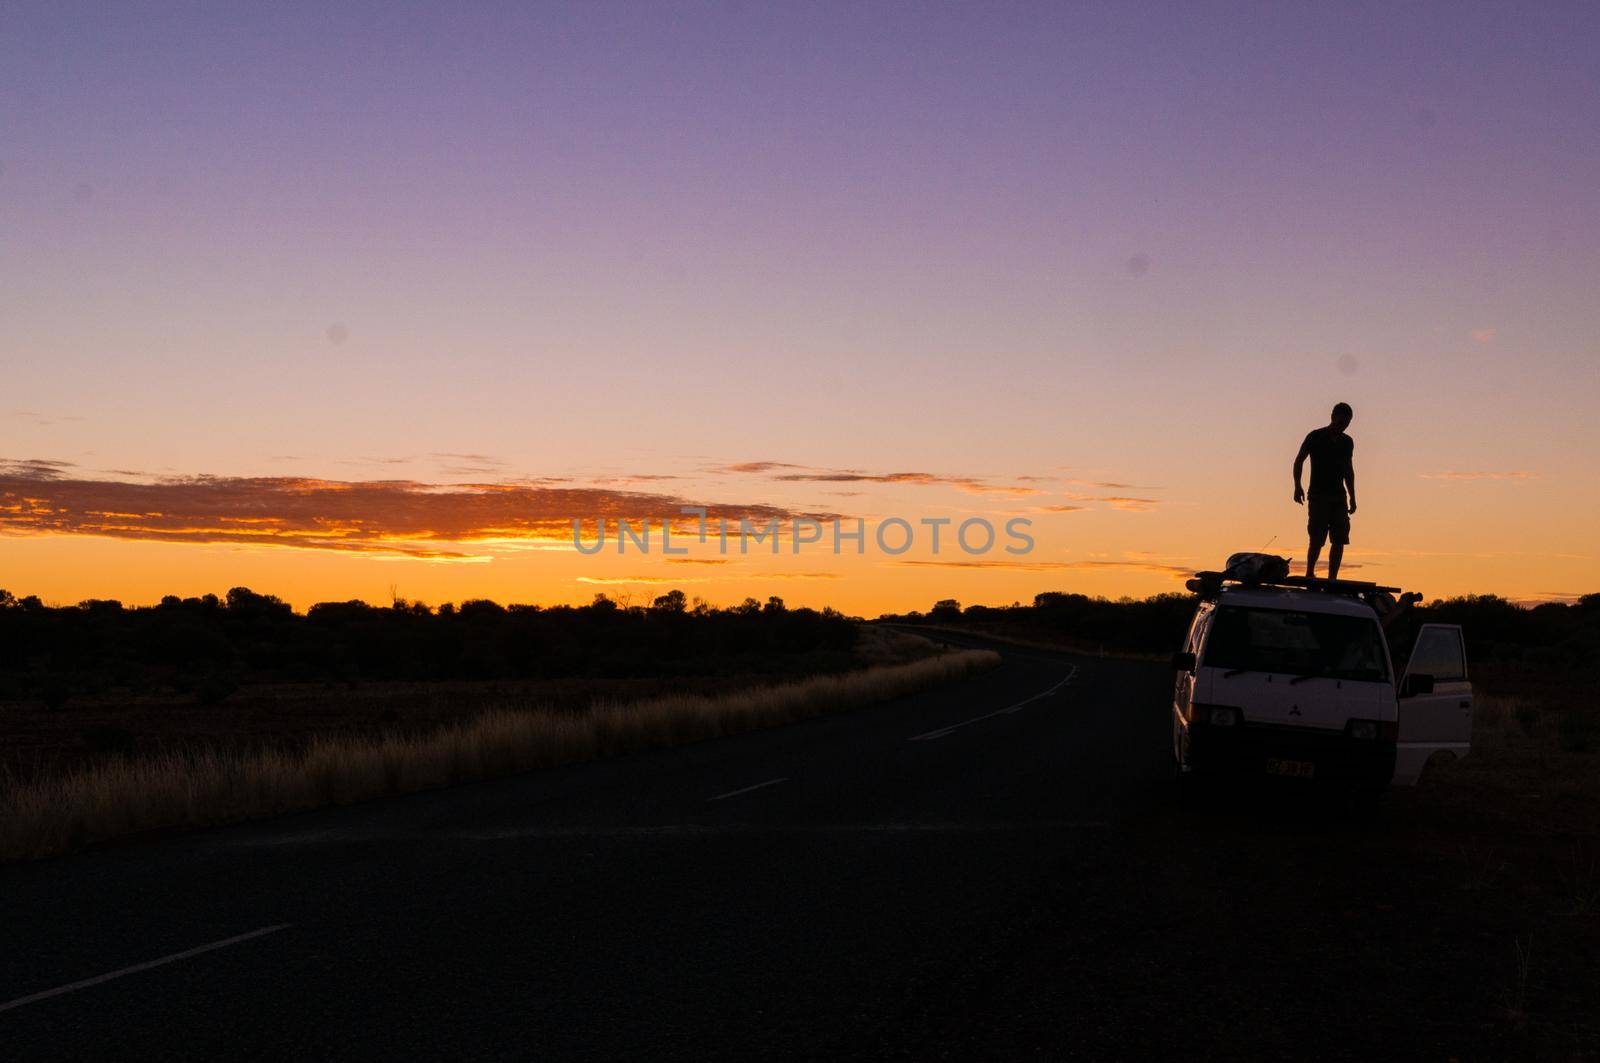 young man standing on car while a nice Sunset in the Outback of Australia